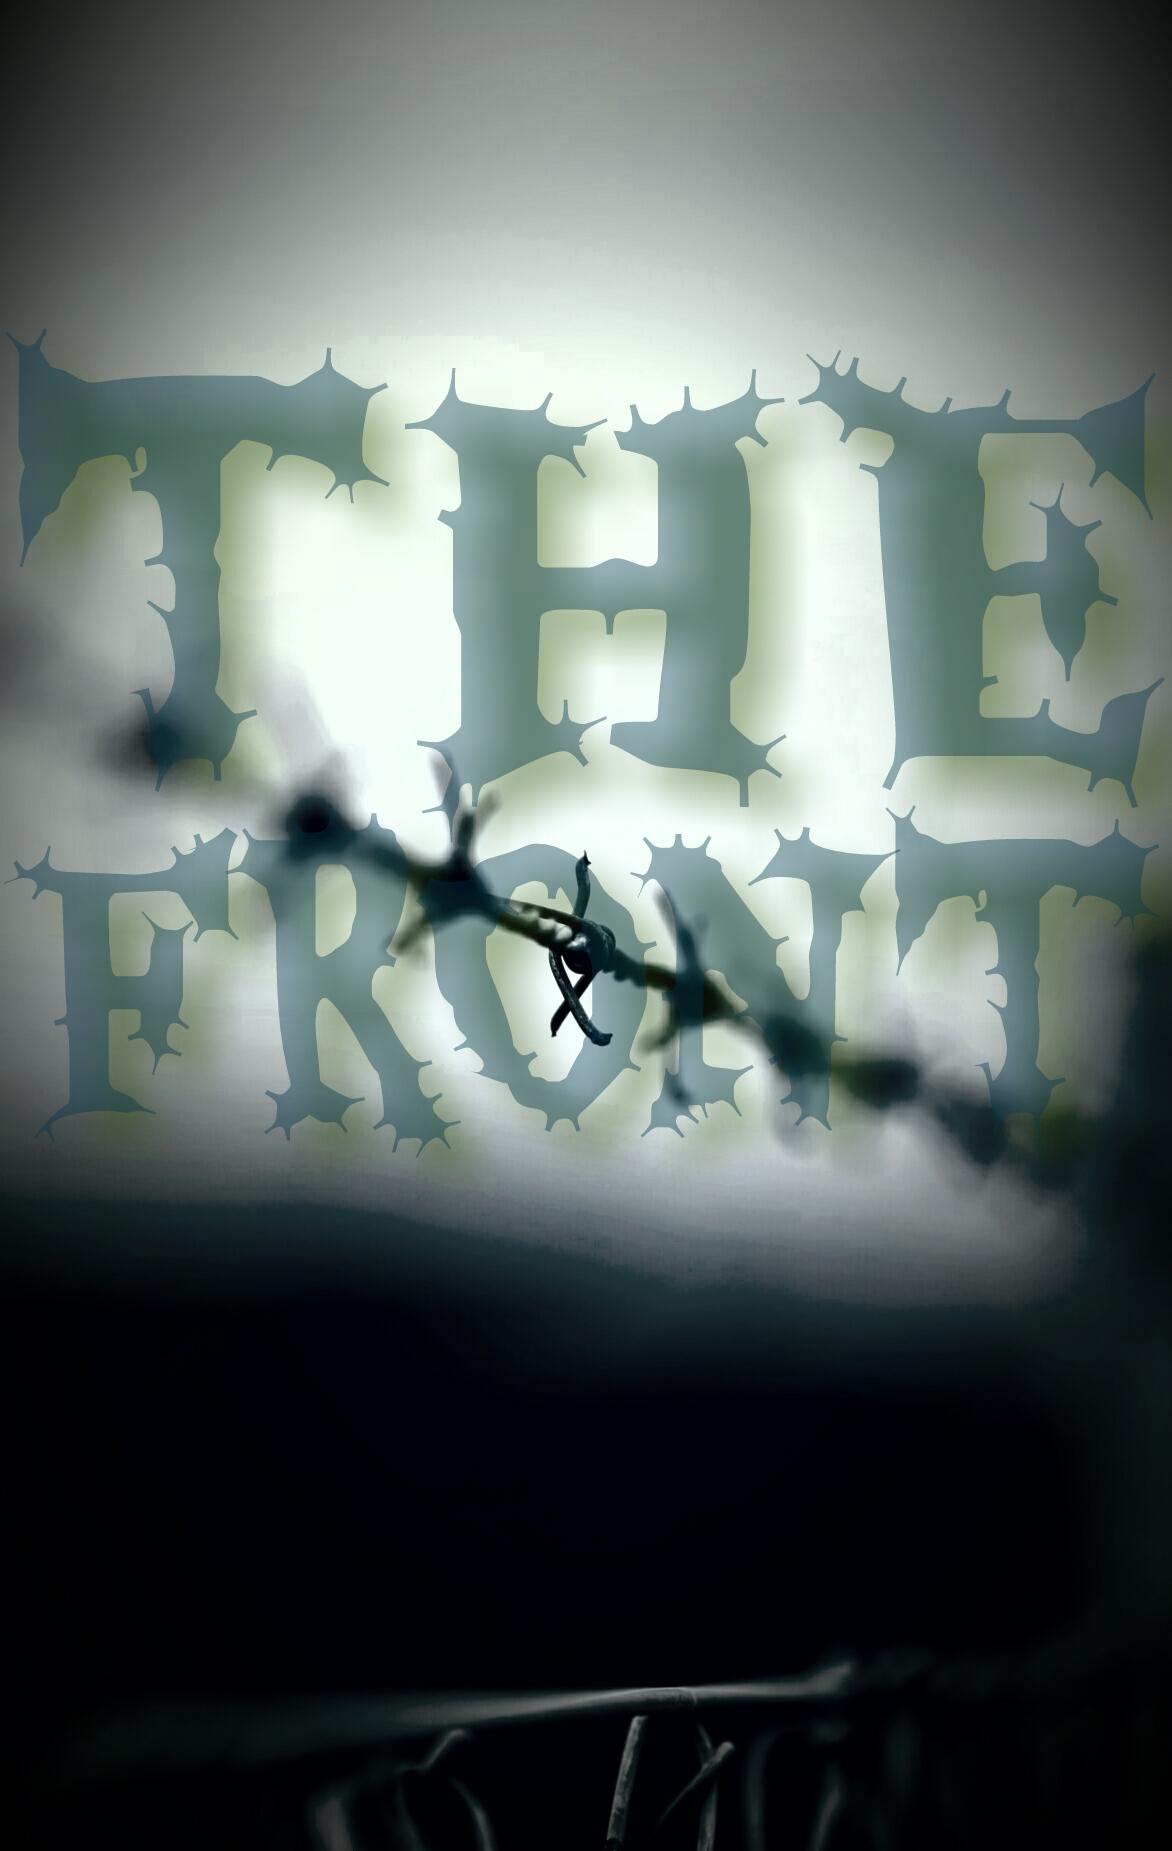 The Front (2018)